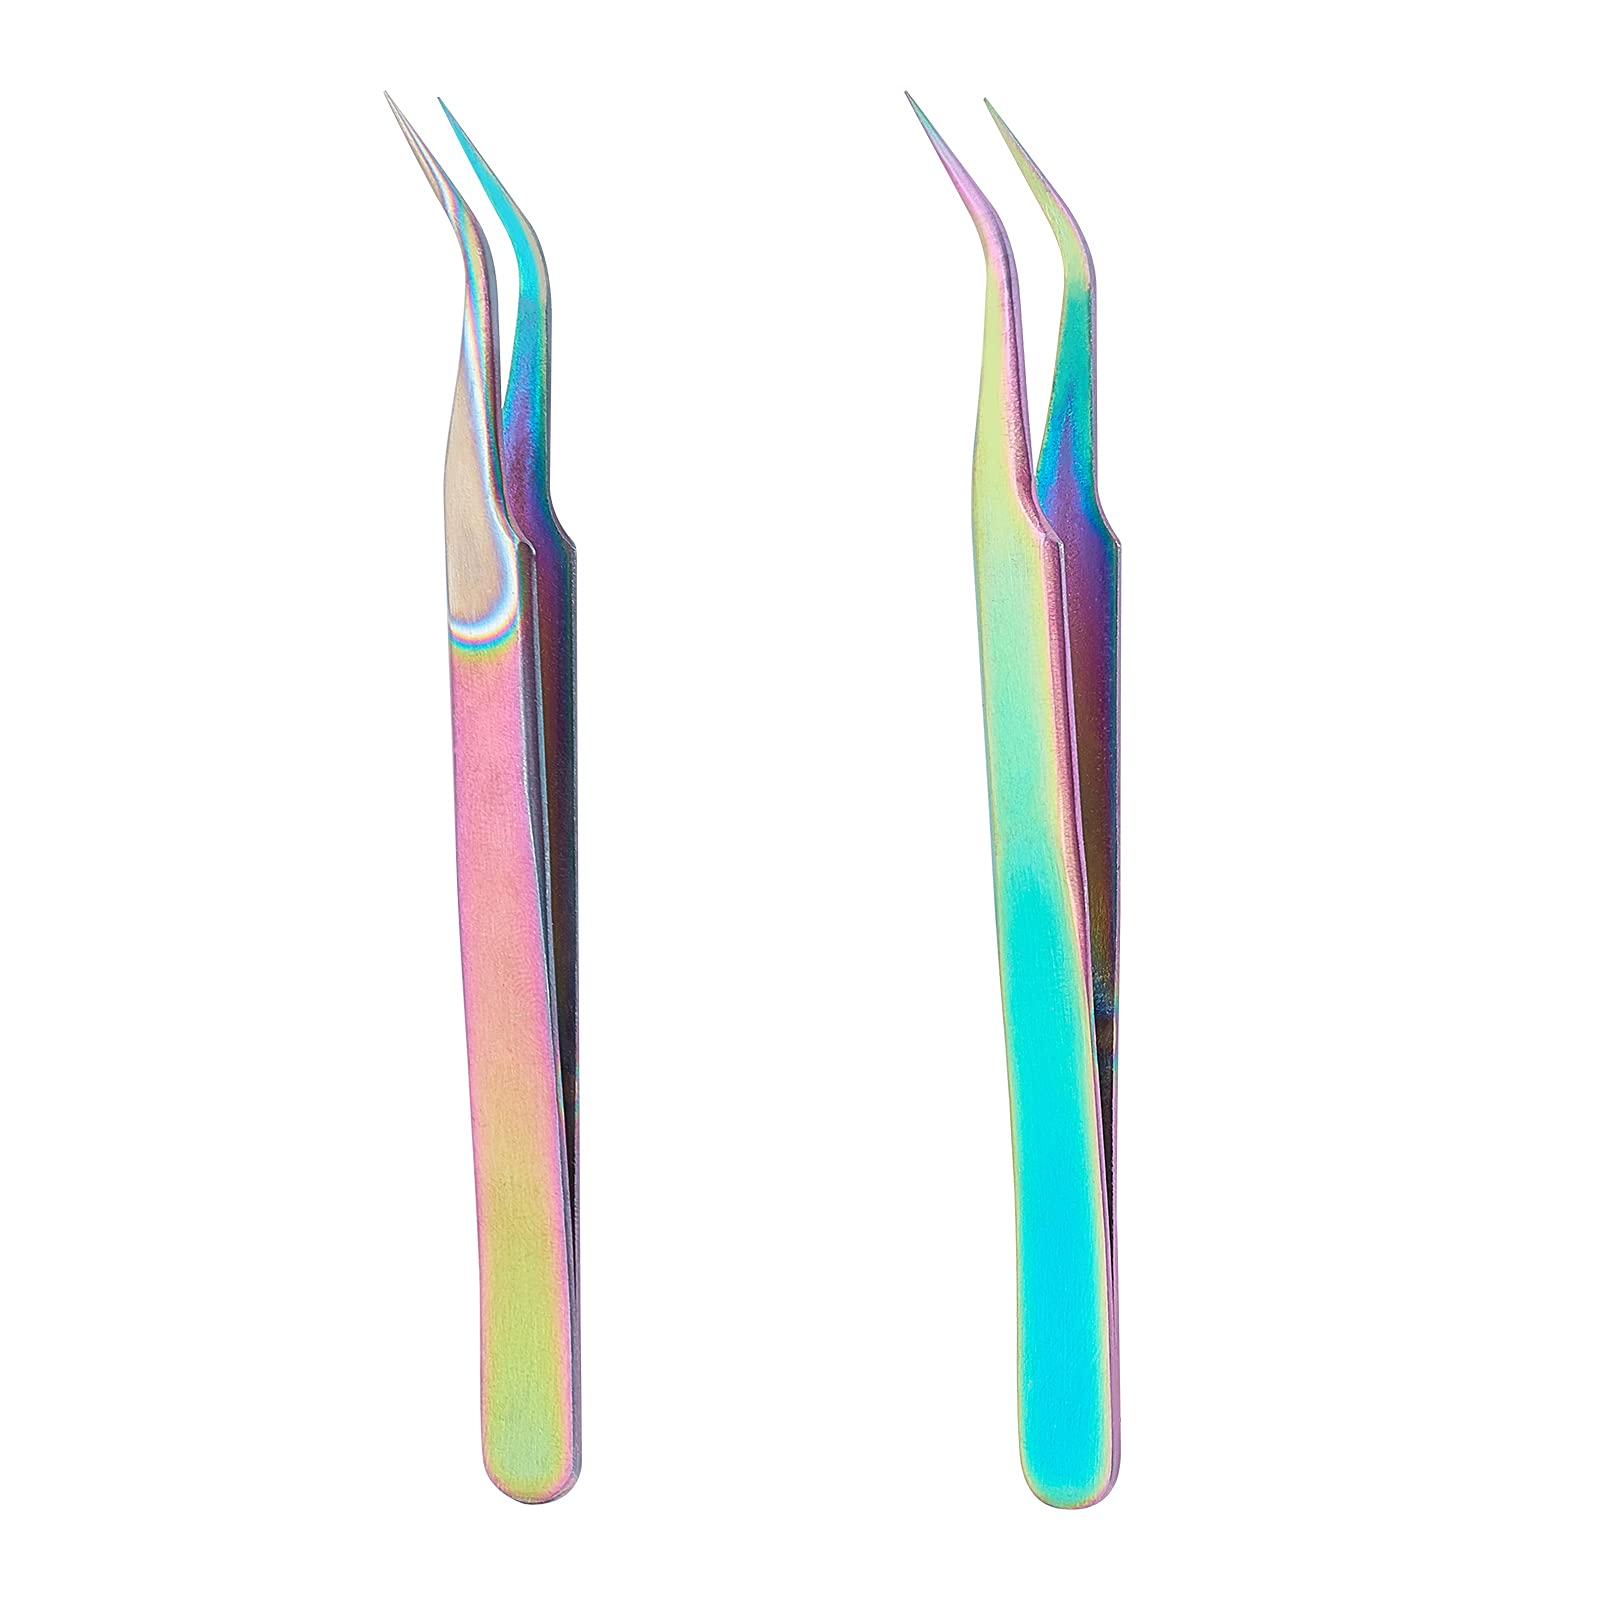 UNICRAFTALE 2pcs Stainless Steel Curved Pointed Craft Tweezer Rainbow Sticker Picking Tool Tweezer for DIY Craft Precision Tweezers Jewelry Making Electronics and Laboratory Works 12.1x0.95cm